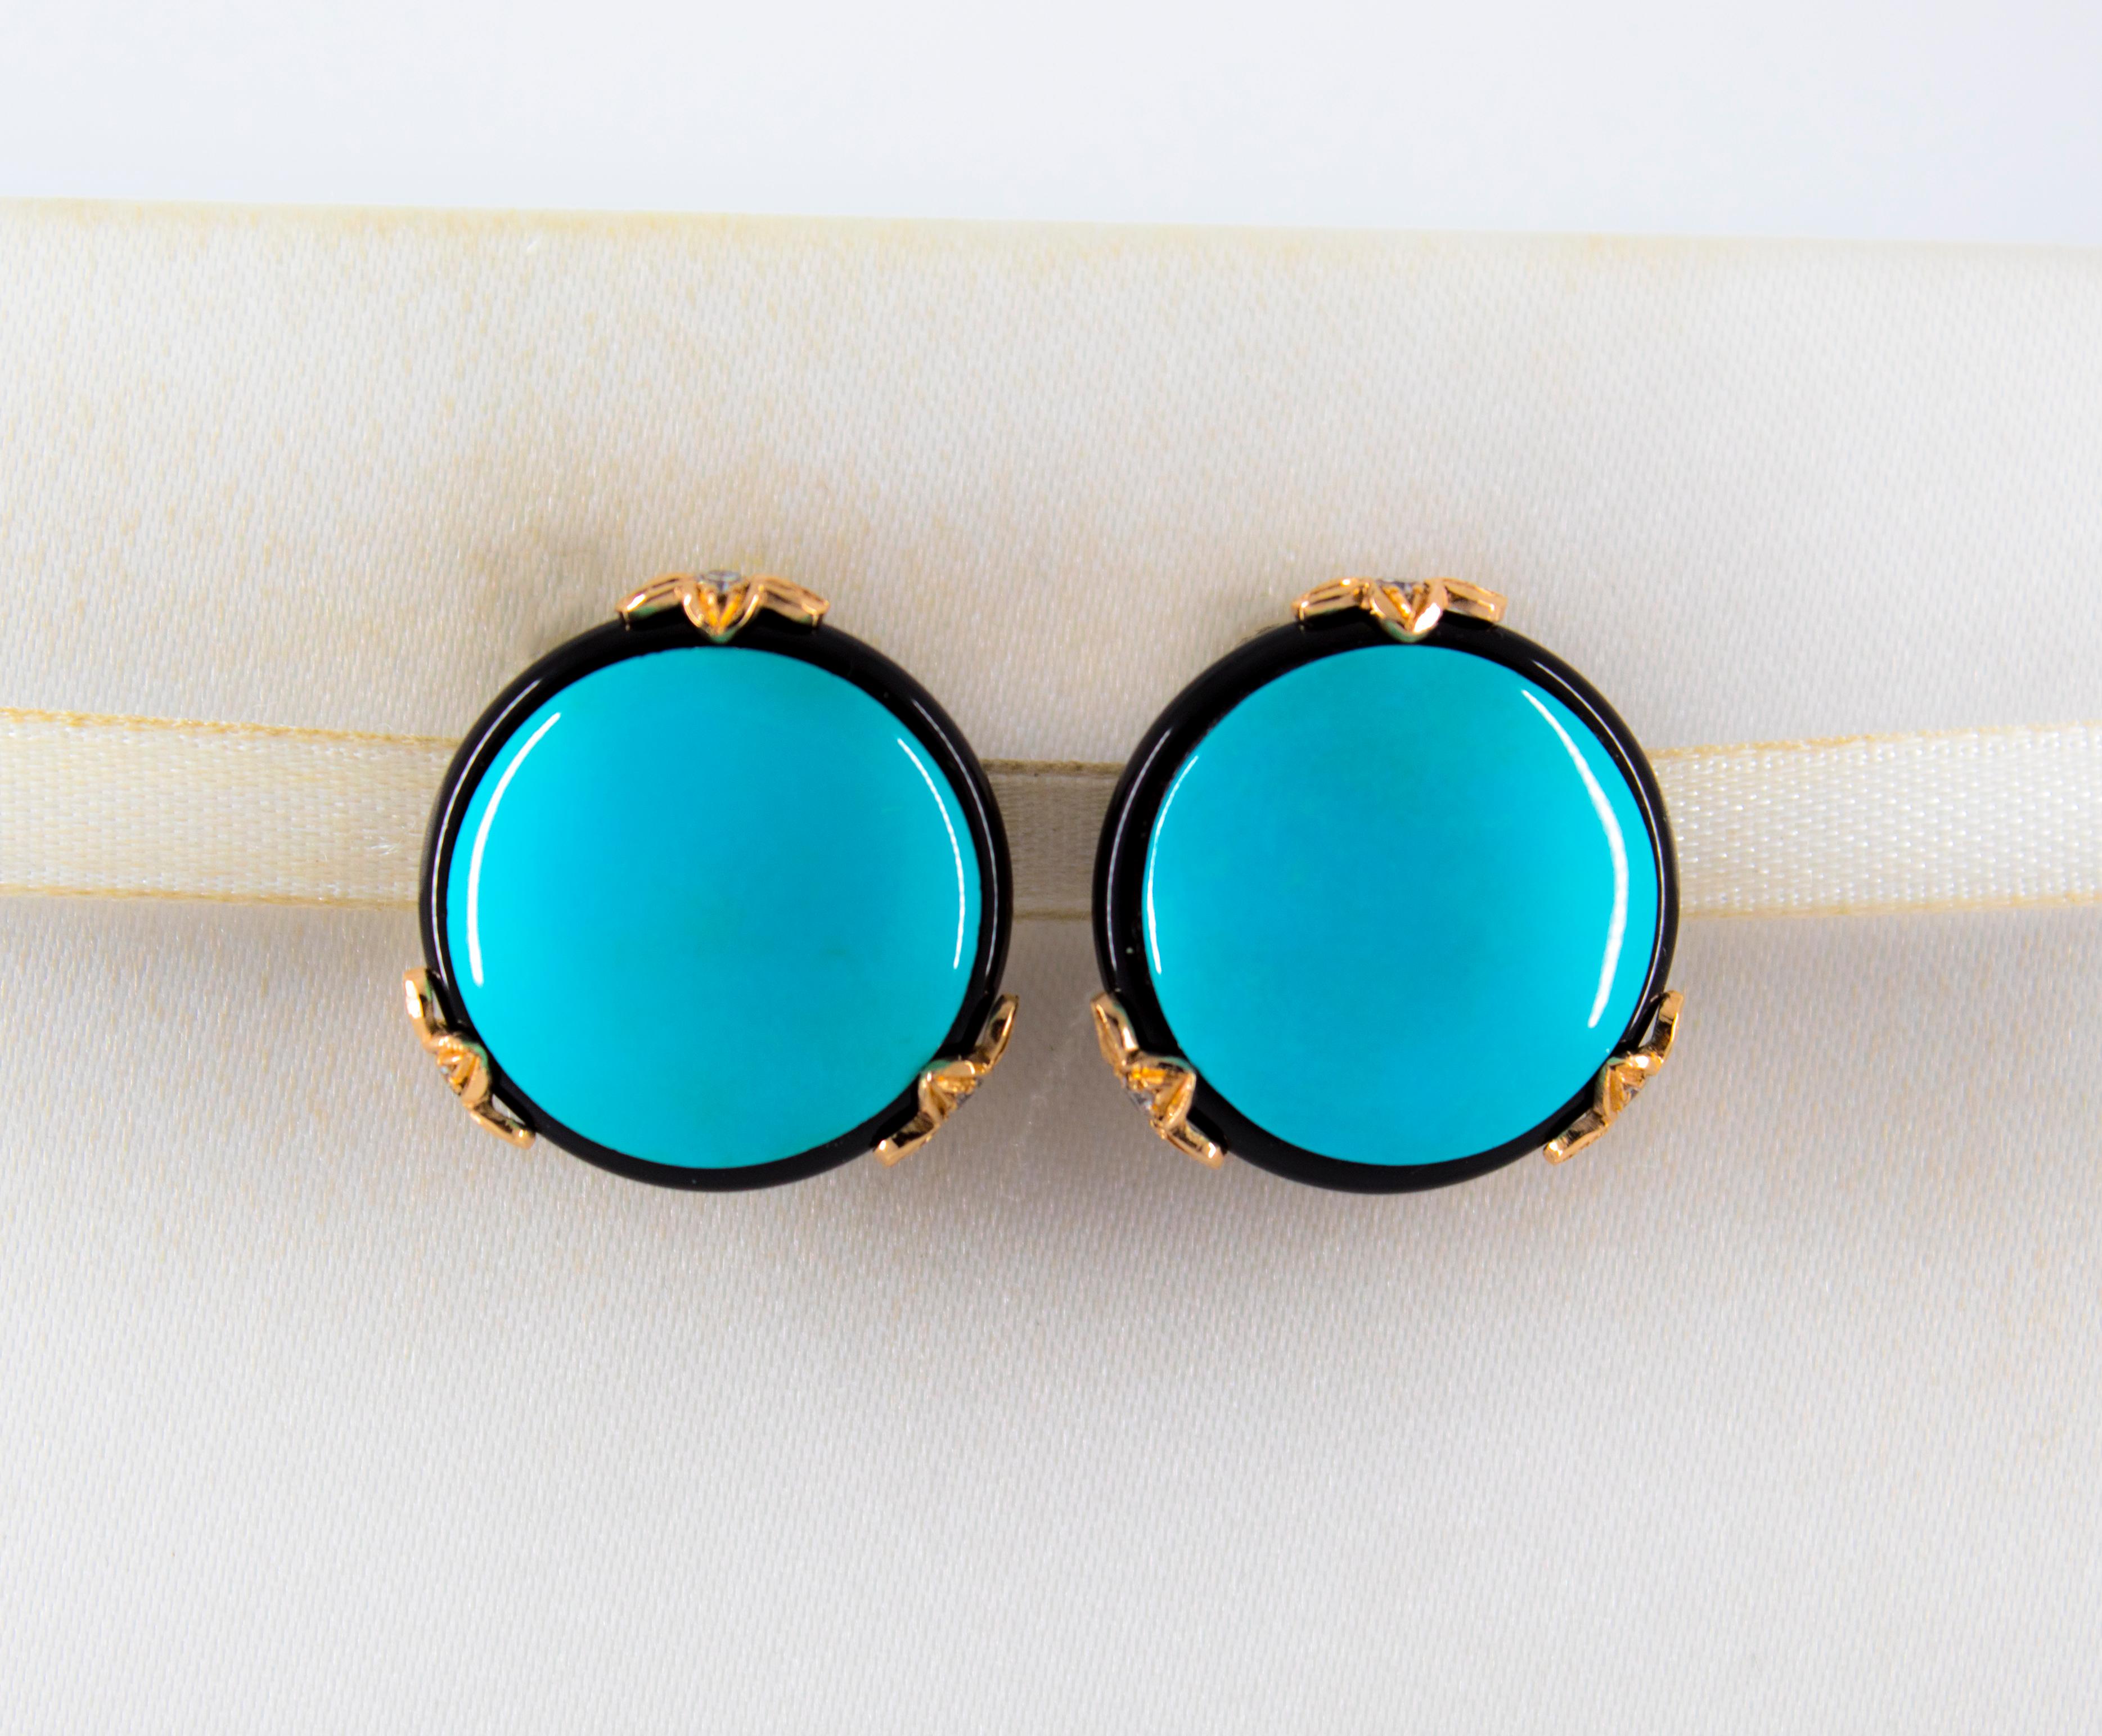 These Earrings are made of 14K Yellow Gold.
These Earrings have 0.20 Carats of White Diamonds.
These Earrings have Turquoise and Onyx.
All our Earrings have pins for pierced ears but we can change the closure and make any of our Earrings suitable